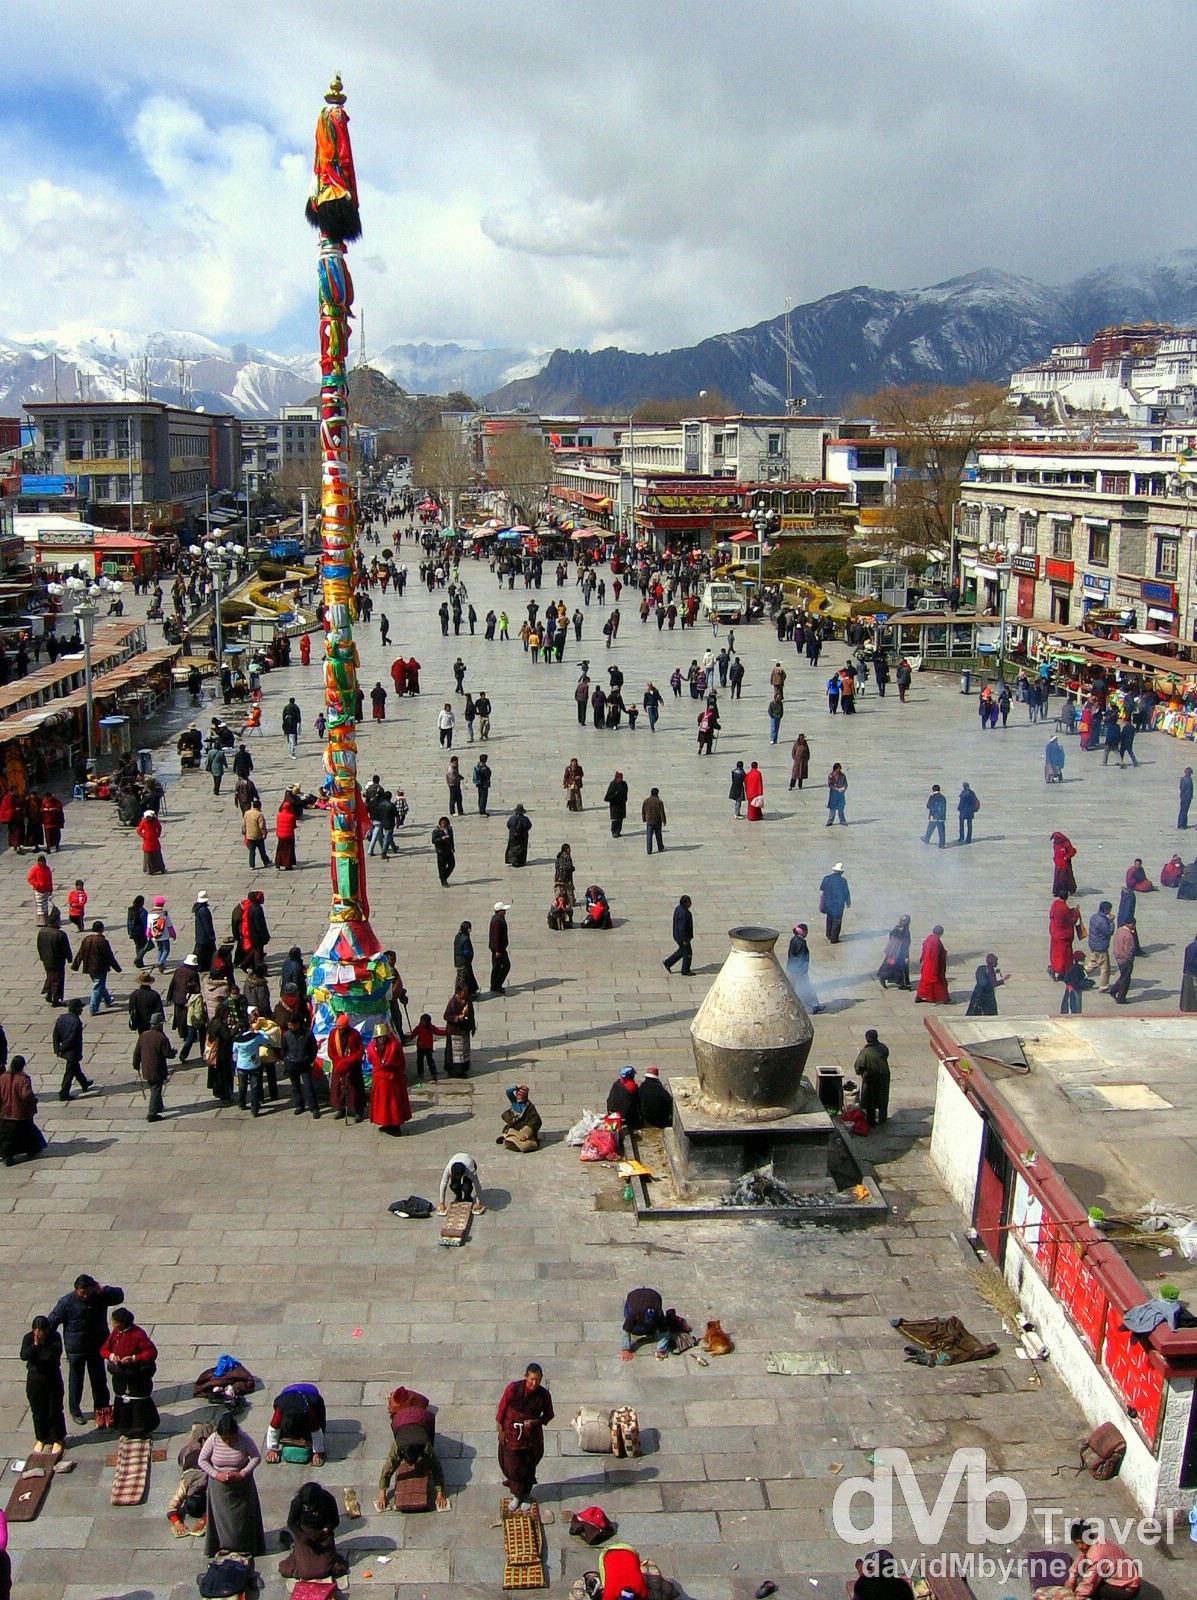 Barkhor Square as seen from the roof of the Jokhang Temple, Lhasa, Tibet. February 27th, 2008.